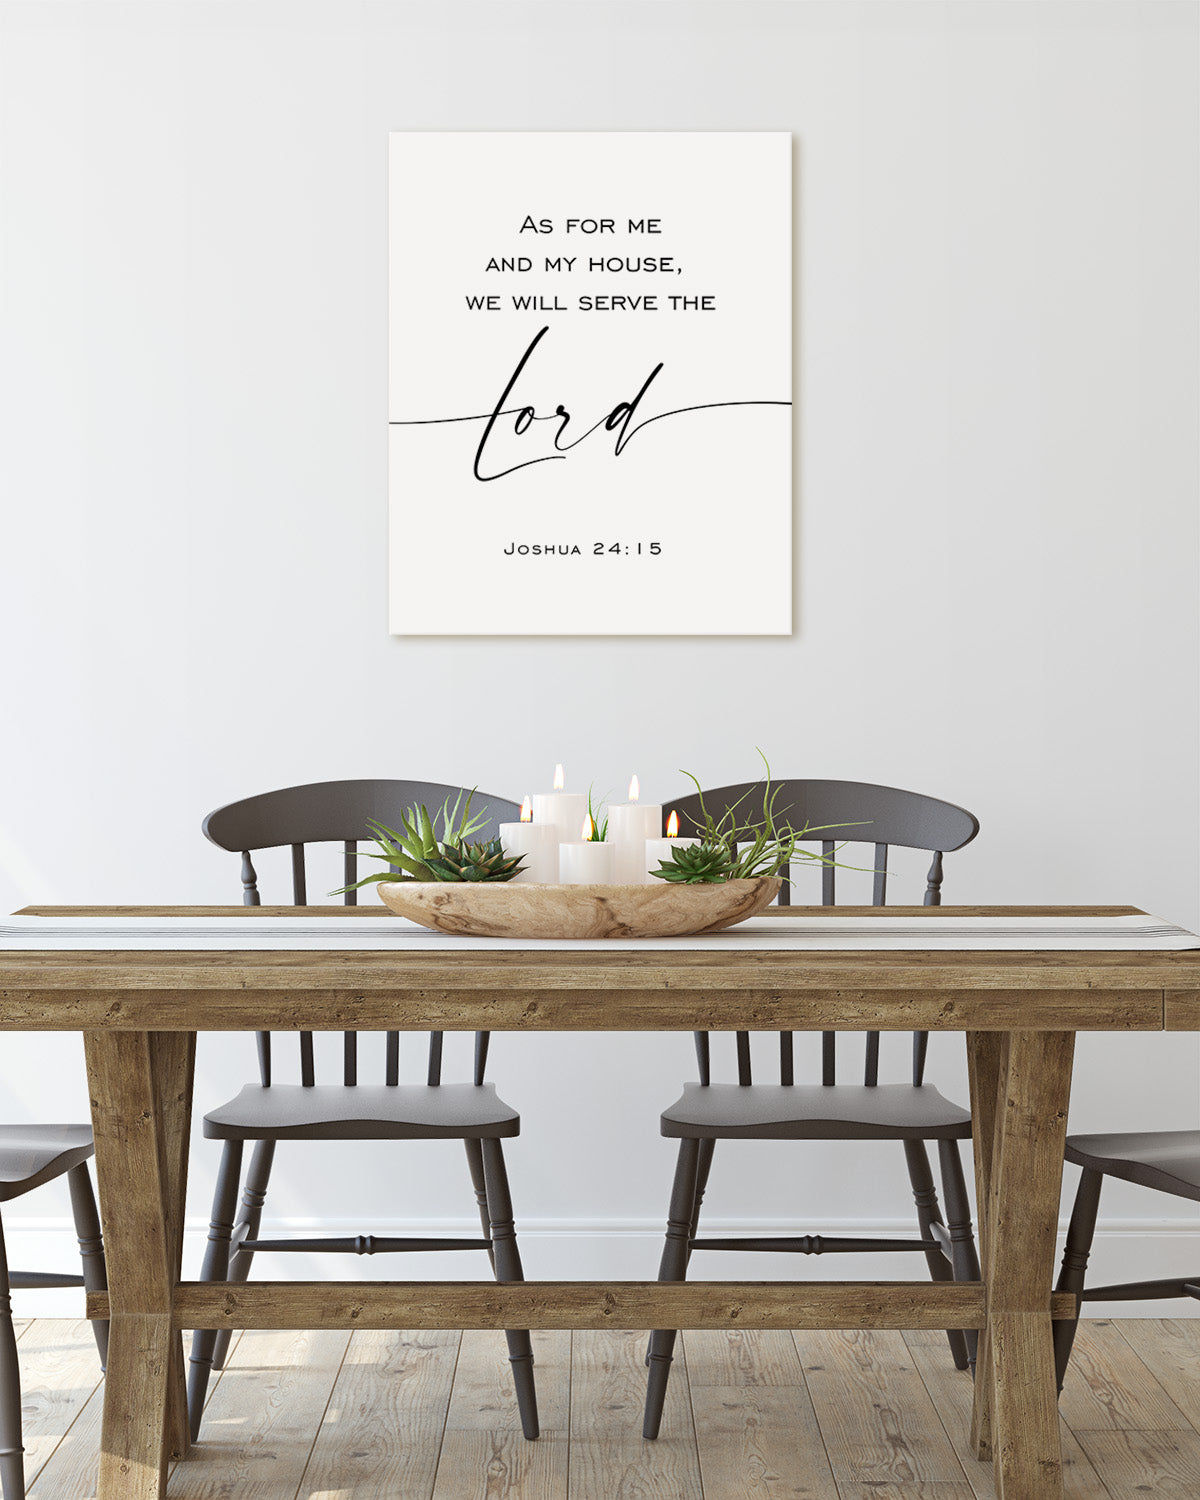 Bible Verses Wall Decor - We will serve the lord - Canvas Religious Wall Art